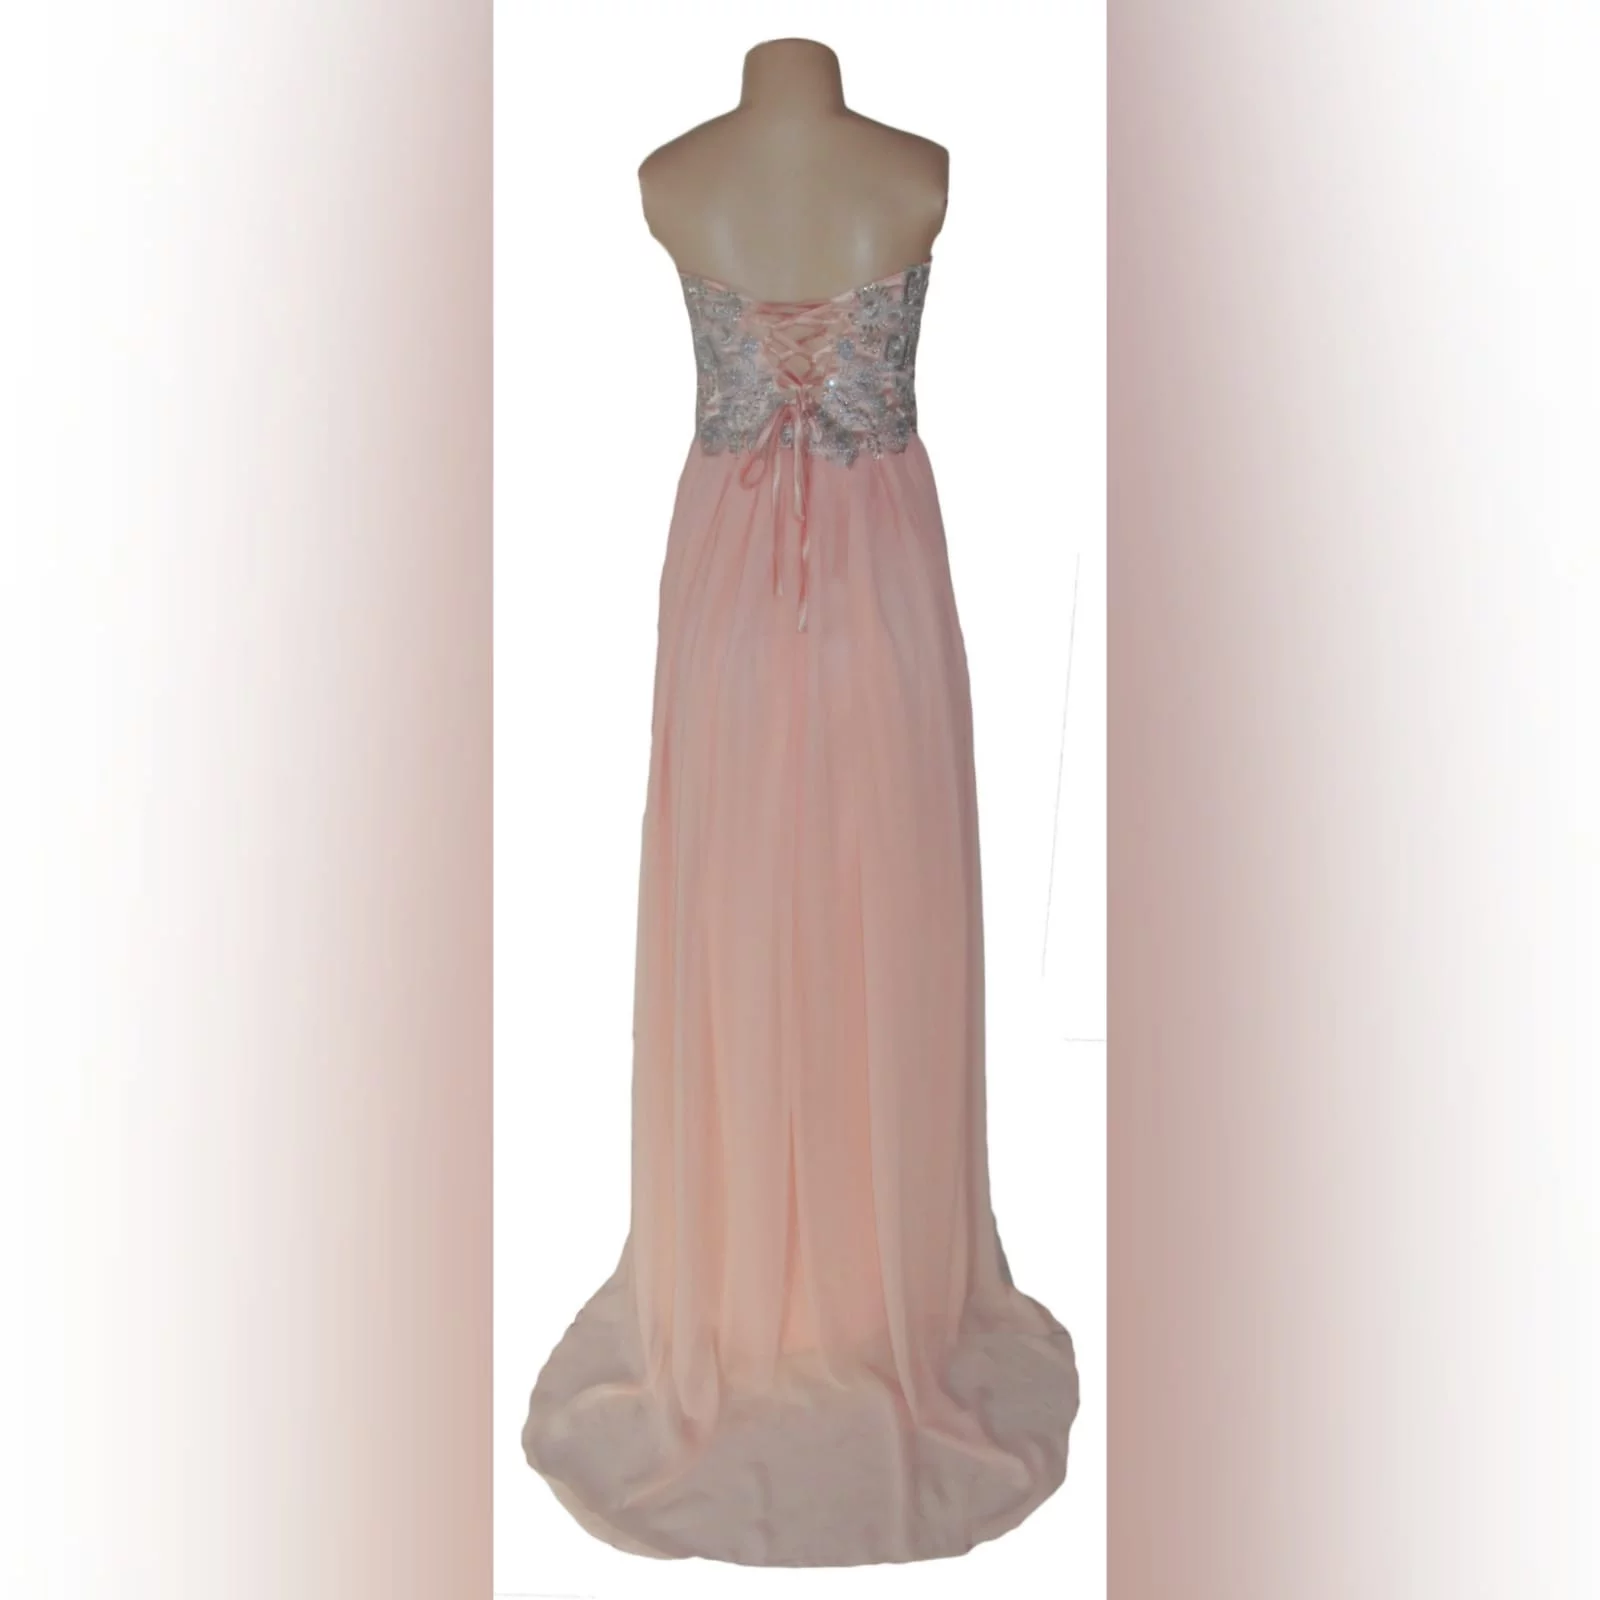 Peach and silver fun prom dress 7 peach and silver fun prom dress. Bodice detailed with appliques and beads, with a lace-up back. Bottom with gathered chiffon and an overlayer opened in front.